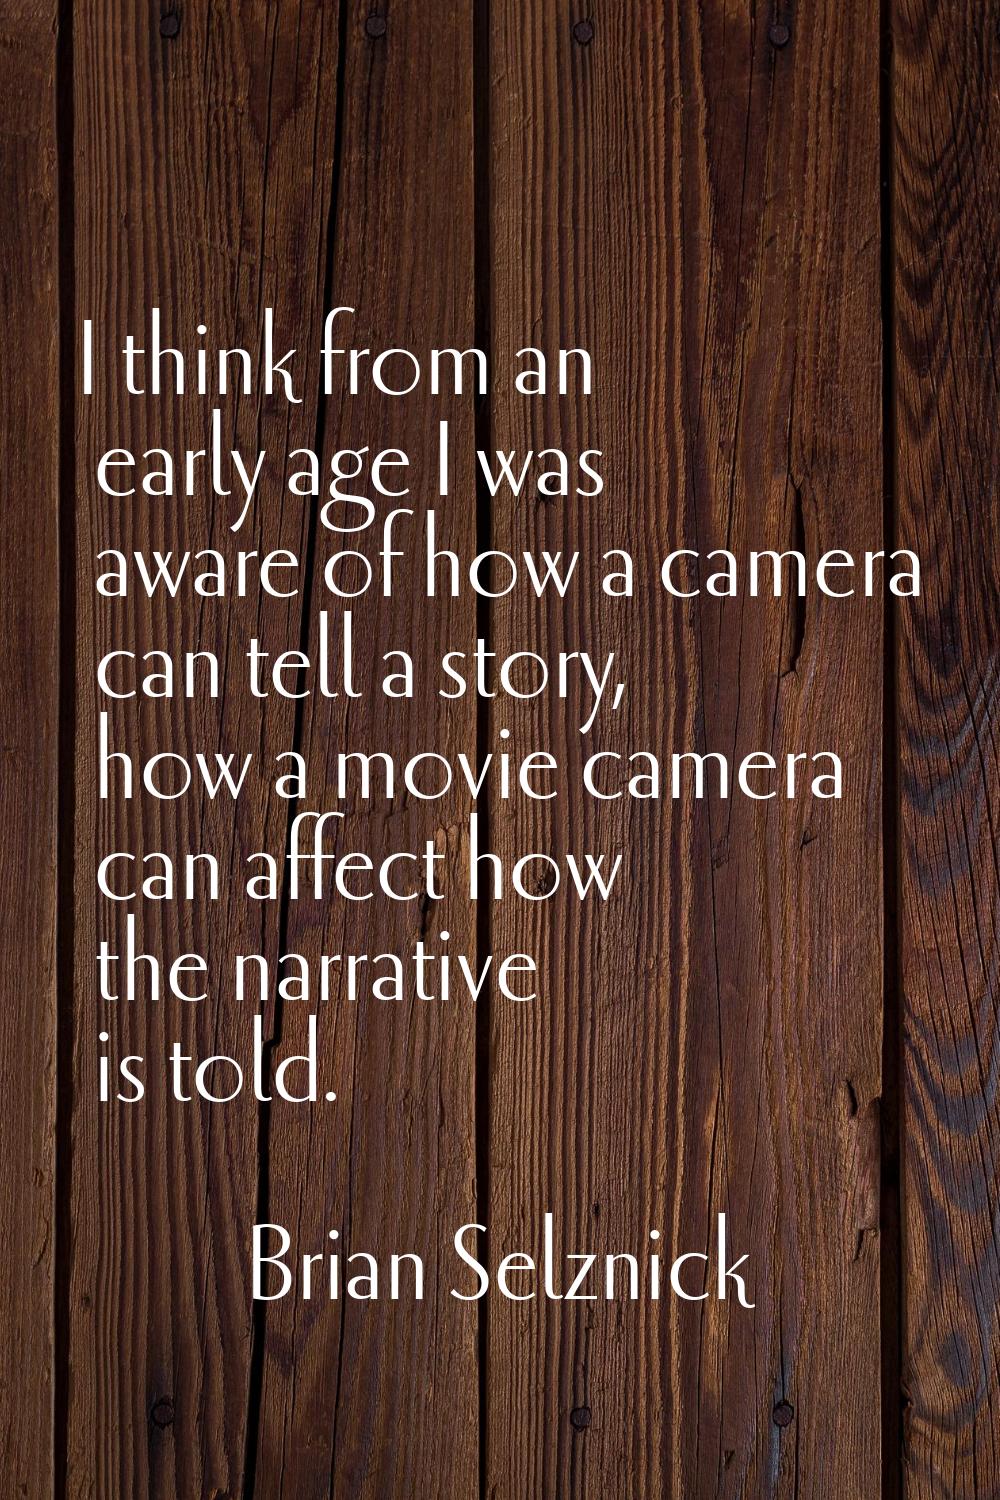 I think from an early age I was aware of how a camera can tell a story, how a movie camera can affe